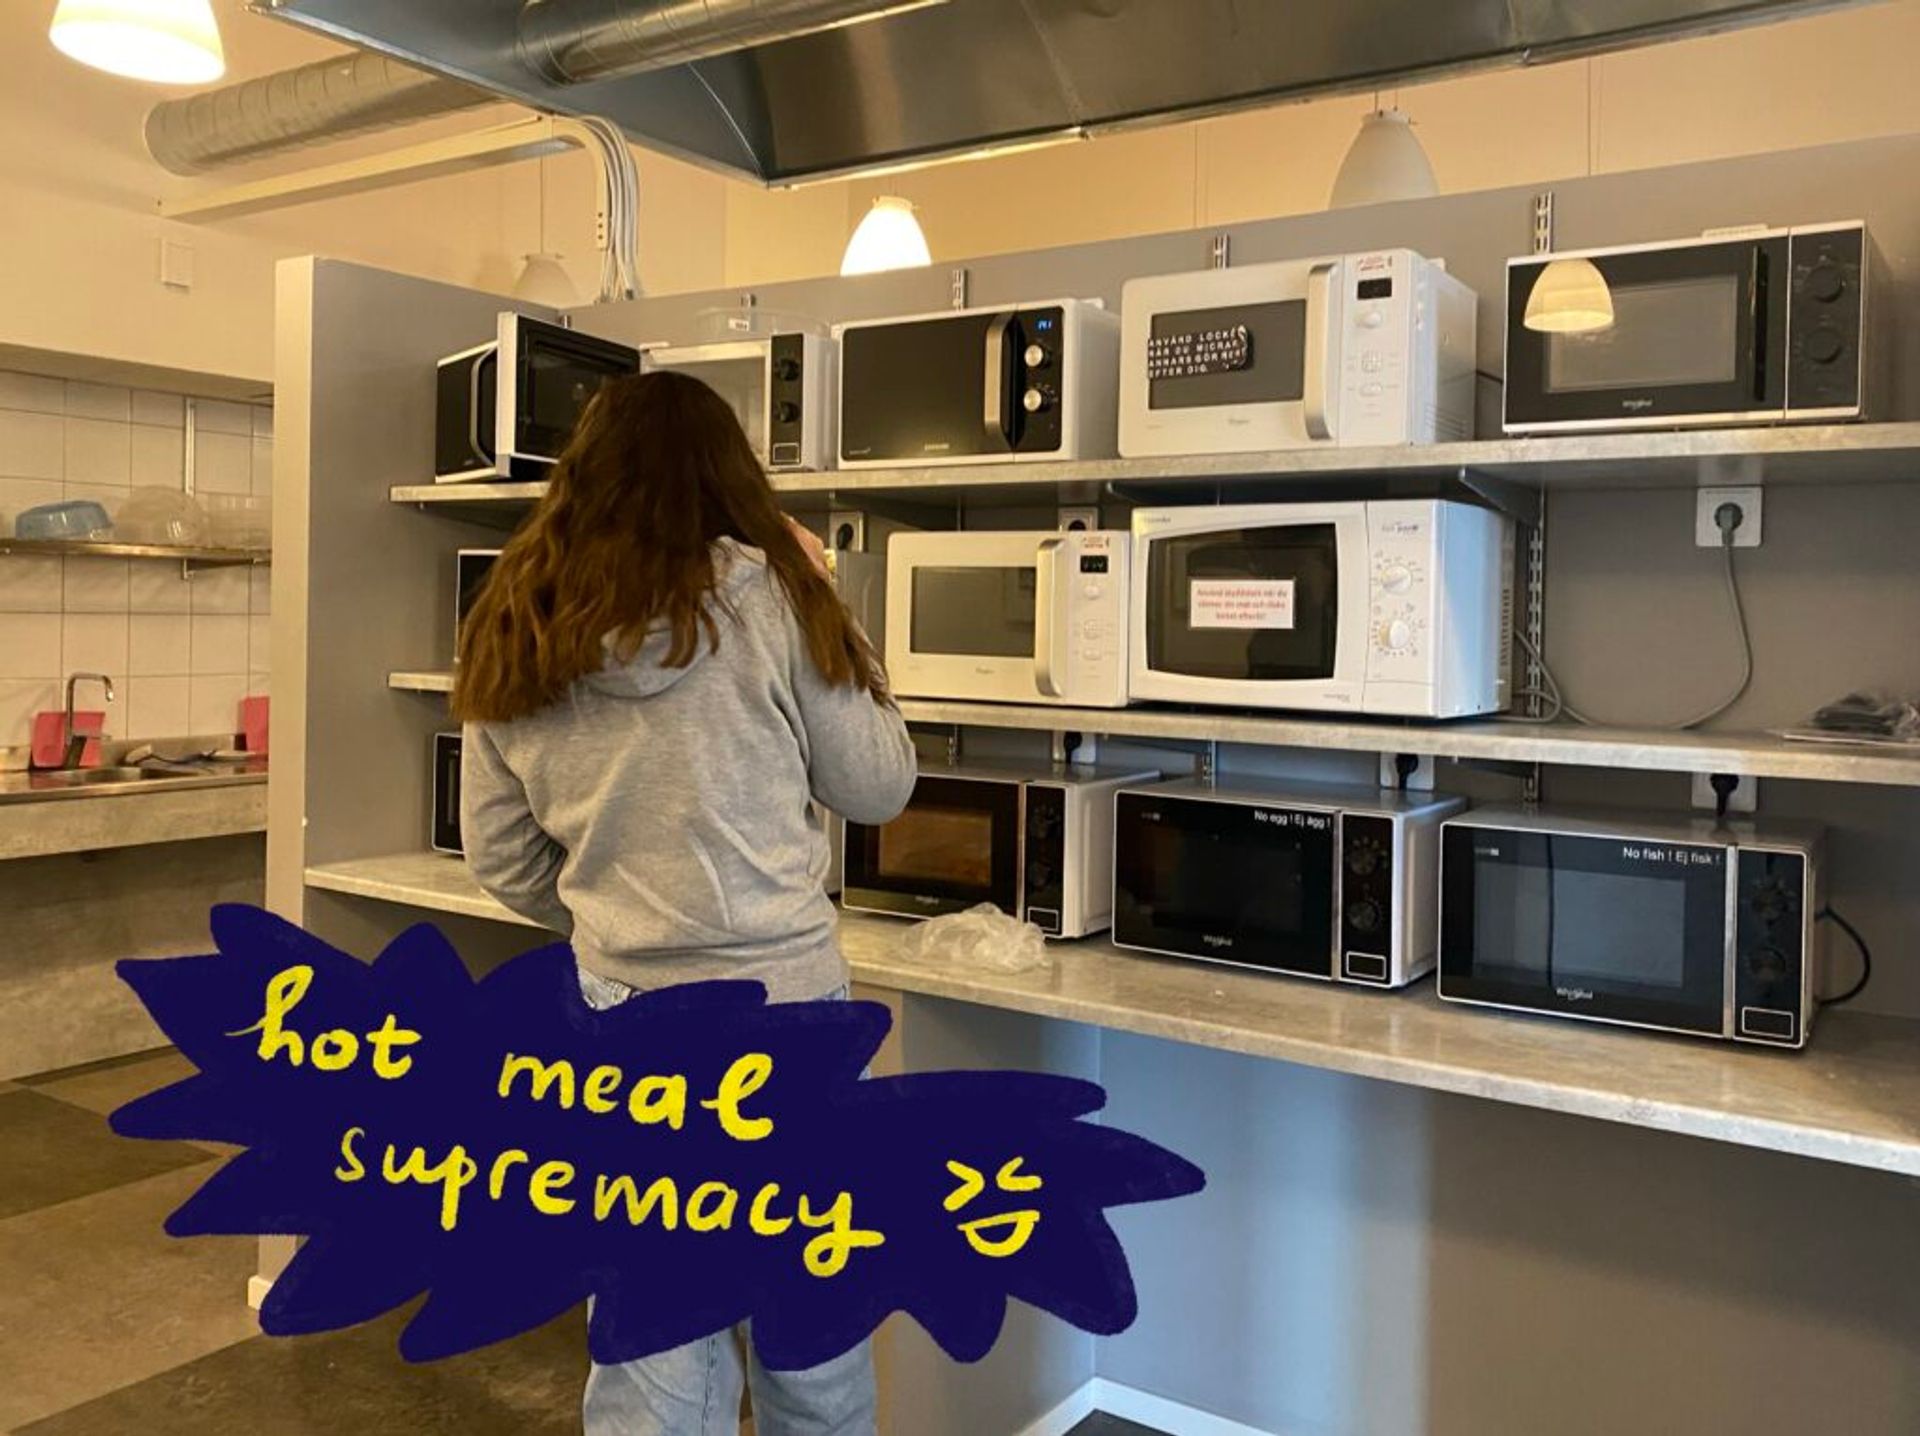 A person stands in front of a set of microwaves in a shared kitchen area.